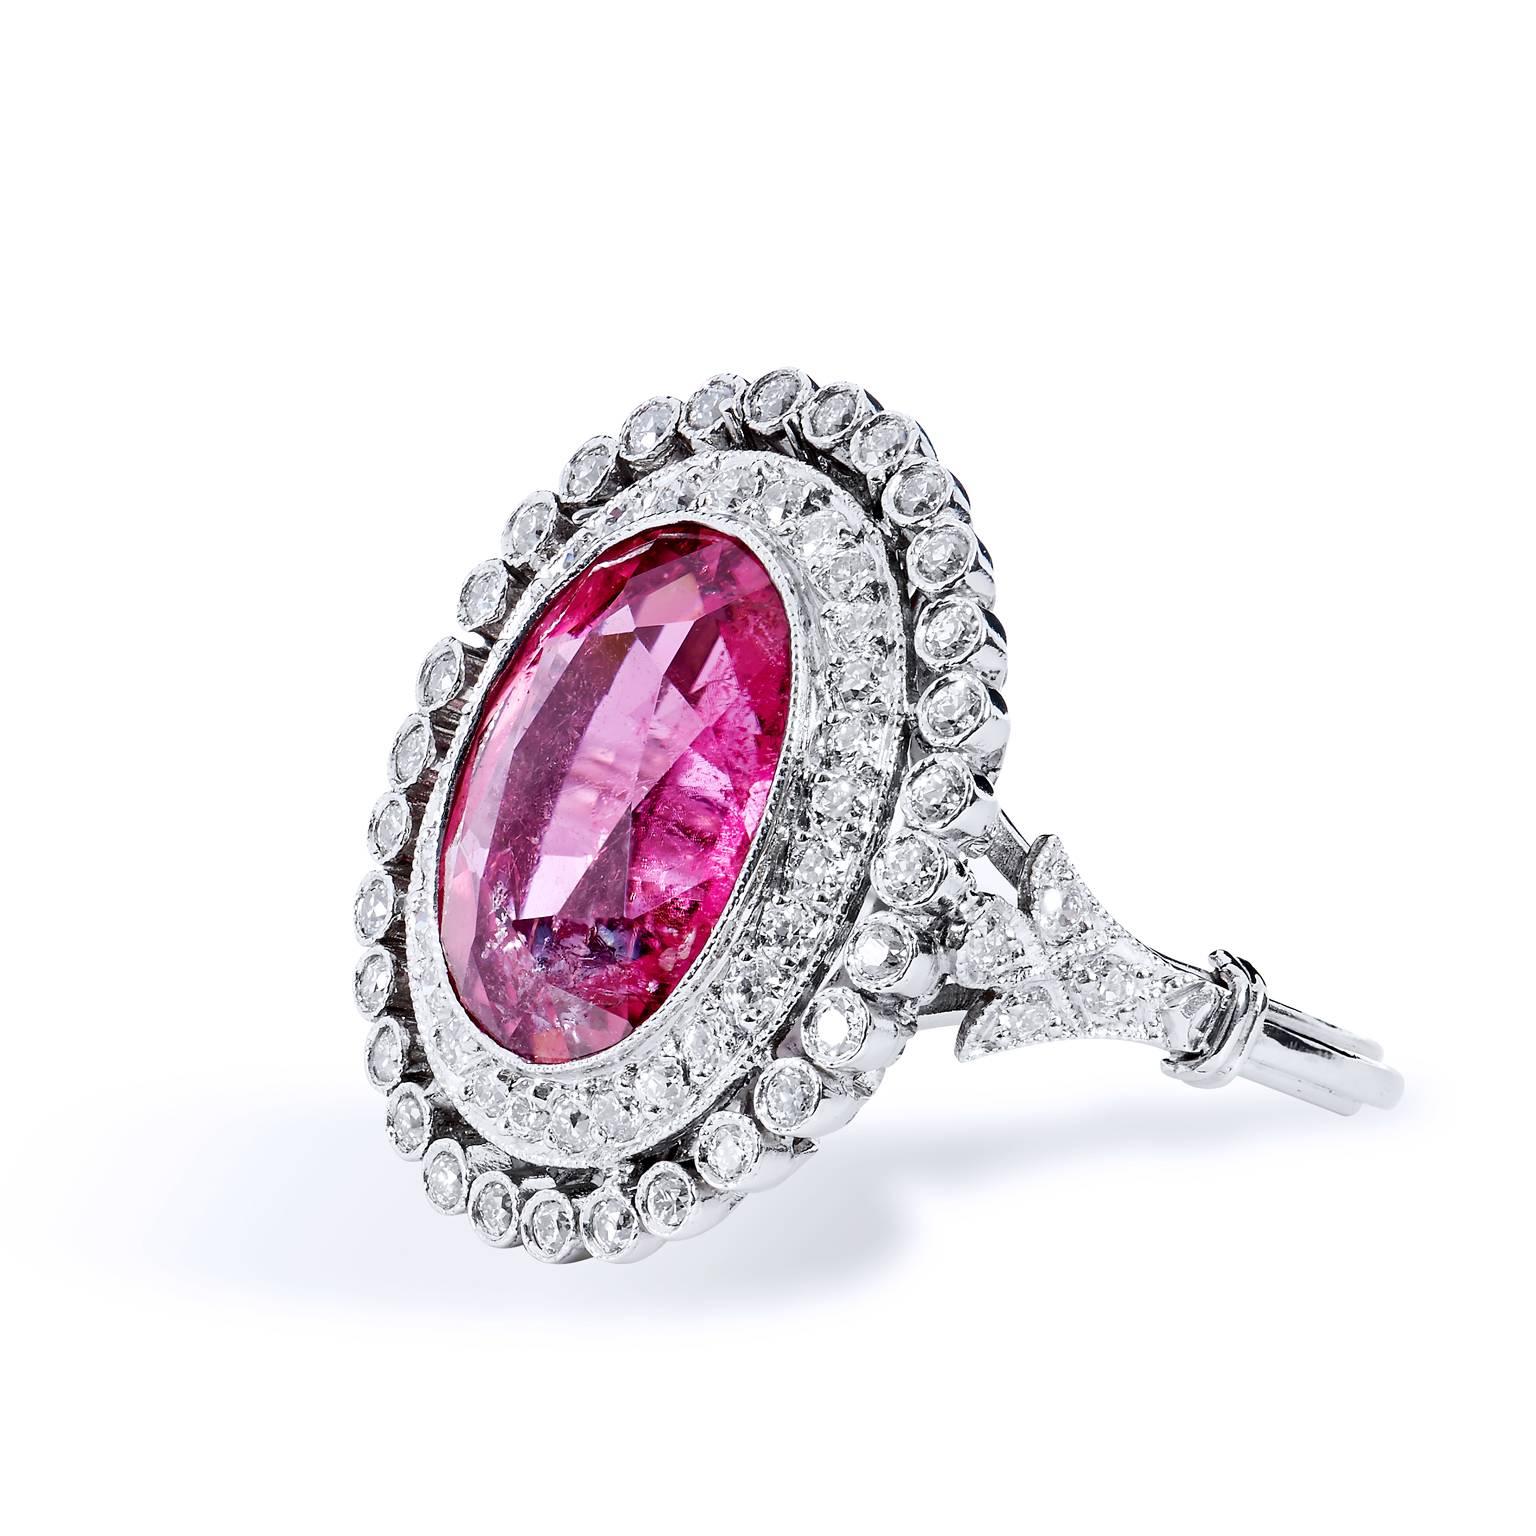 Art Deco Inspired 5.96 Carat Pink Tourmaline and Diamond Halo Platinum Ring

This is a stunning work of art.  Crafted in platinum, this Art Deco-inspired fashion ring features a 5.96 carat pink tourmaline embraced by two bands of Modern Old European